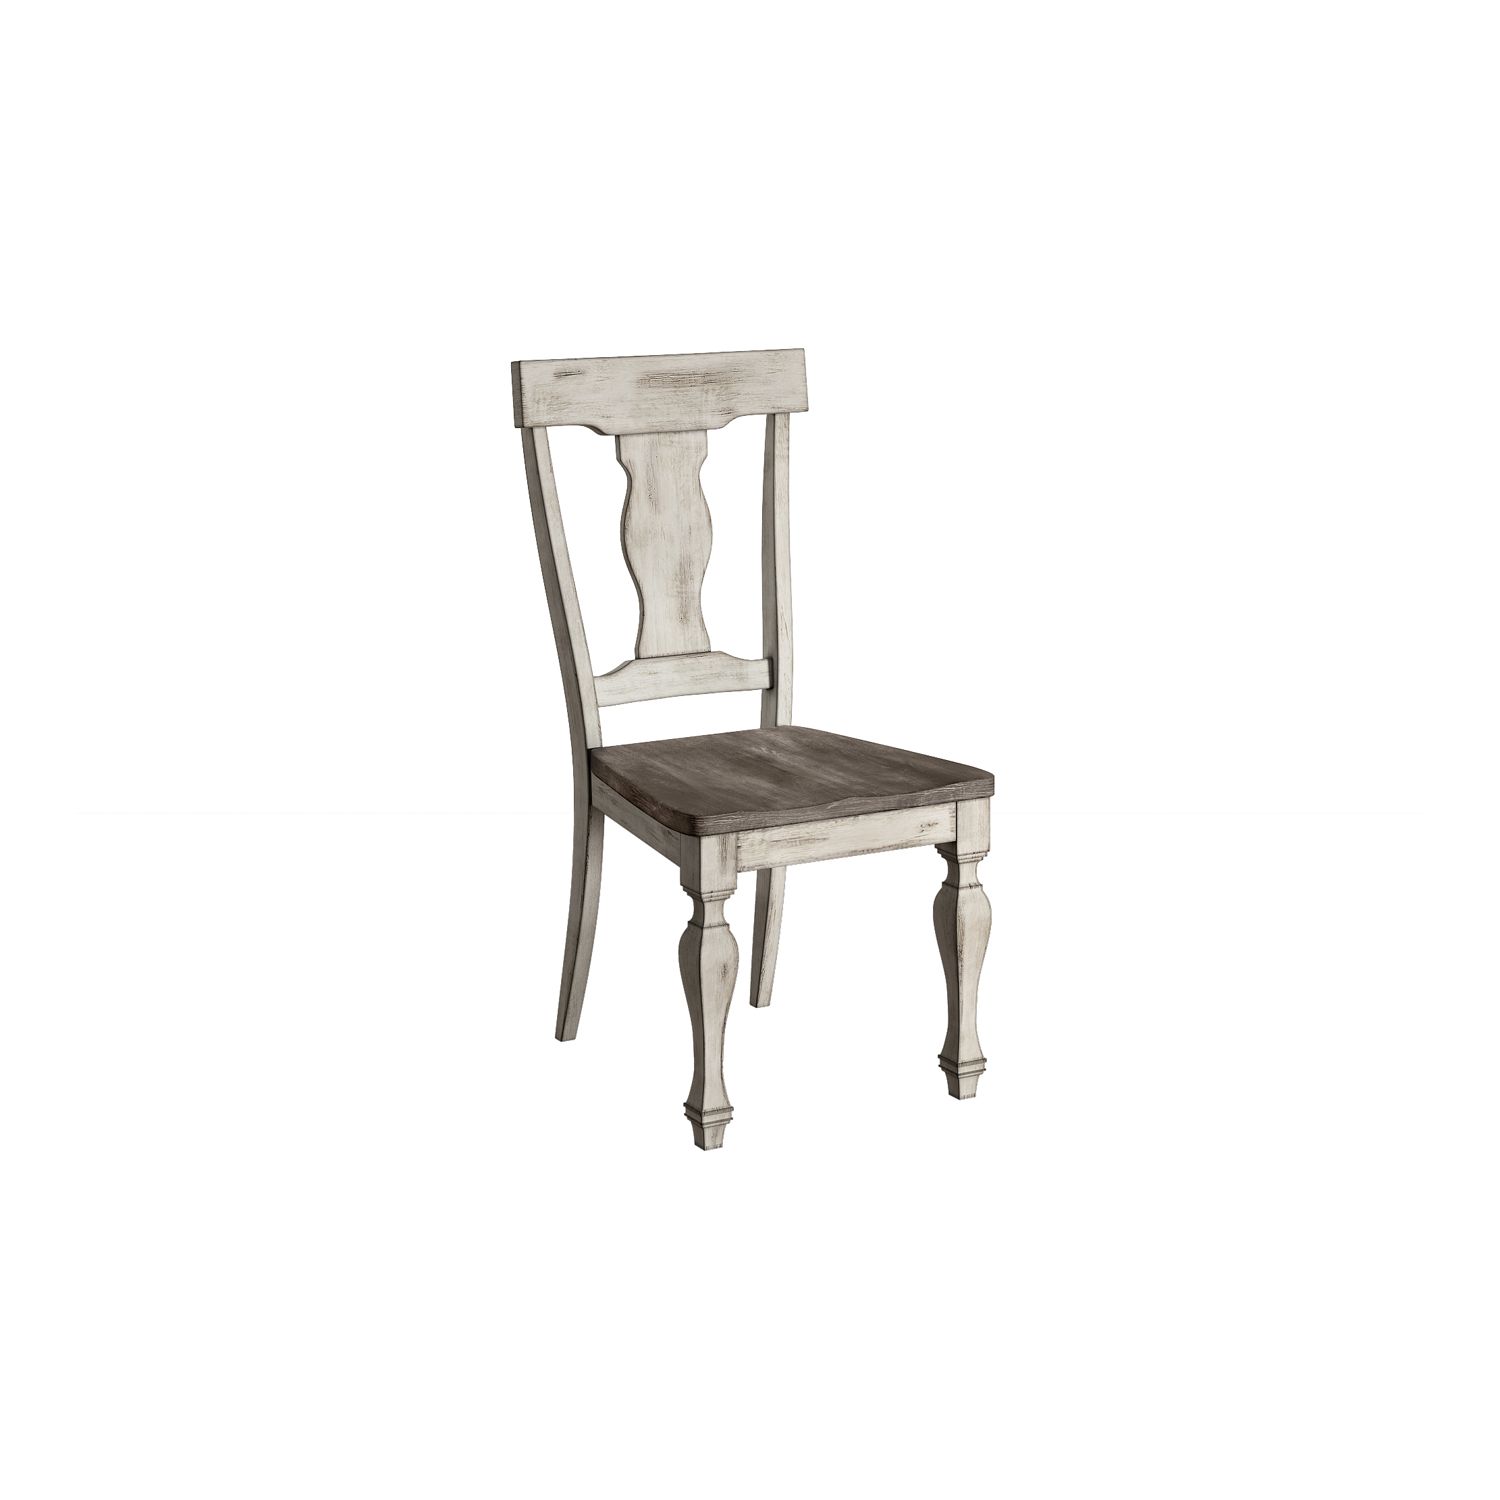 Image for HomeVance Mona Side Chair at Kohl's.